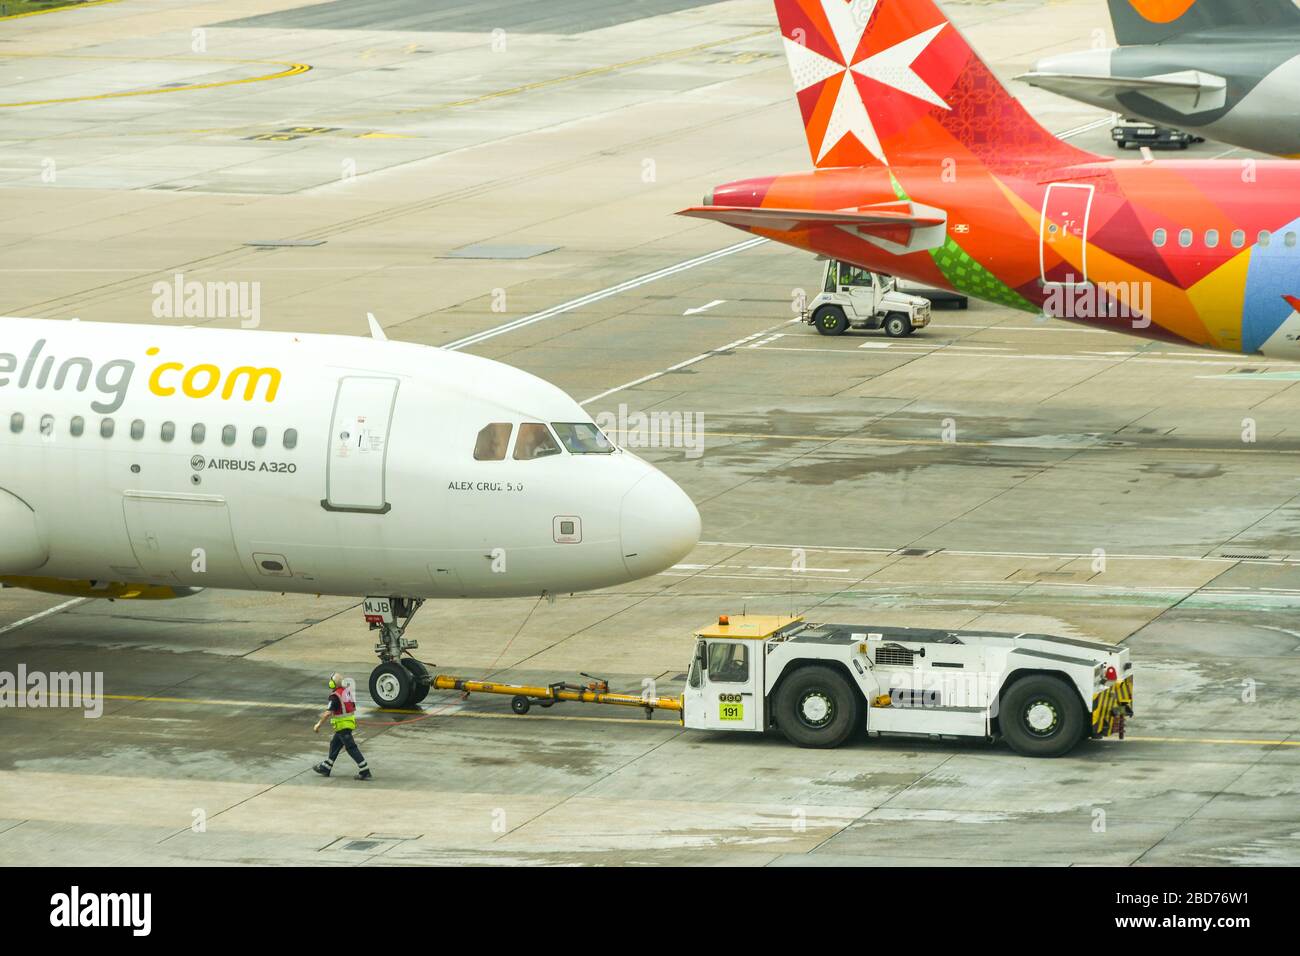 LONDON GATWICK AIRPORT - APRIL 2019: Airbus A320 jet operated by Spanish airline Vueling being pushed back by a tug at London Gatwick Airport Stock Photo